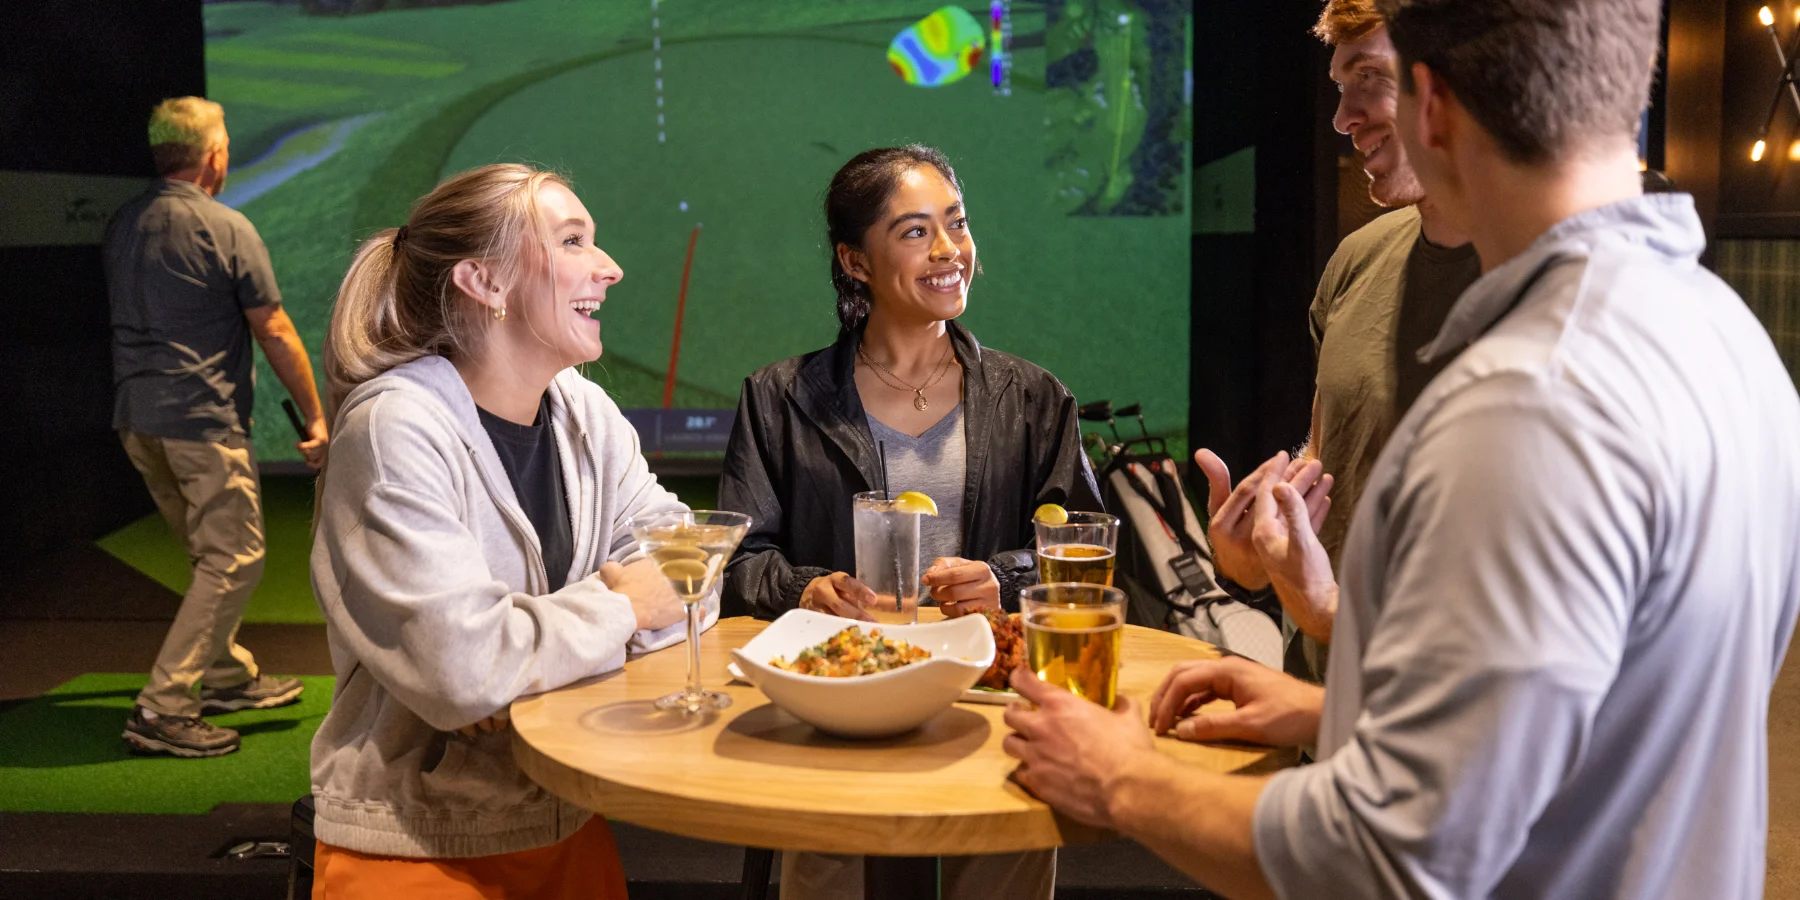 A group of friends smile and laugh while enjoying drinks and appetizers around a table at X-Golf. In the background, a man plays golf at a simulator.